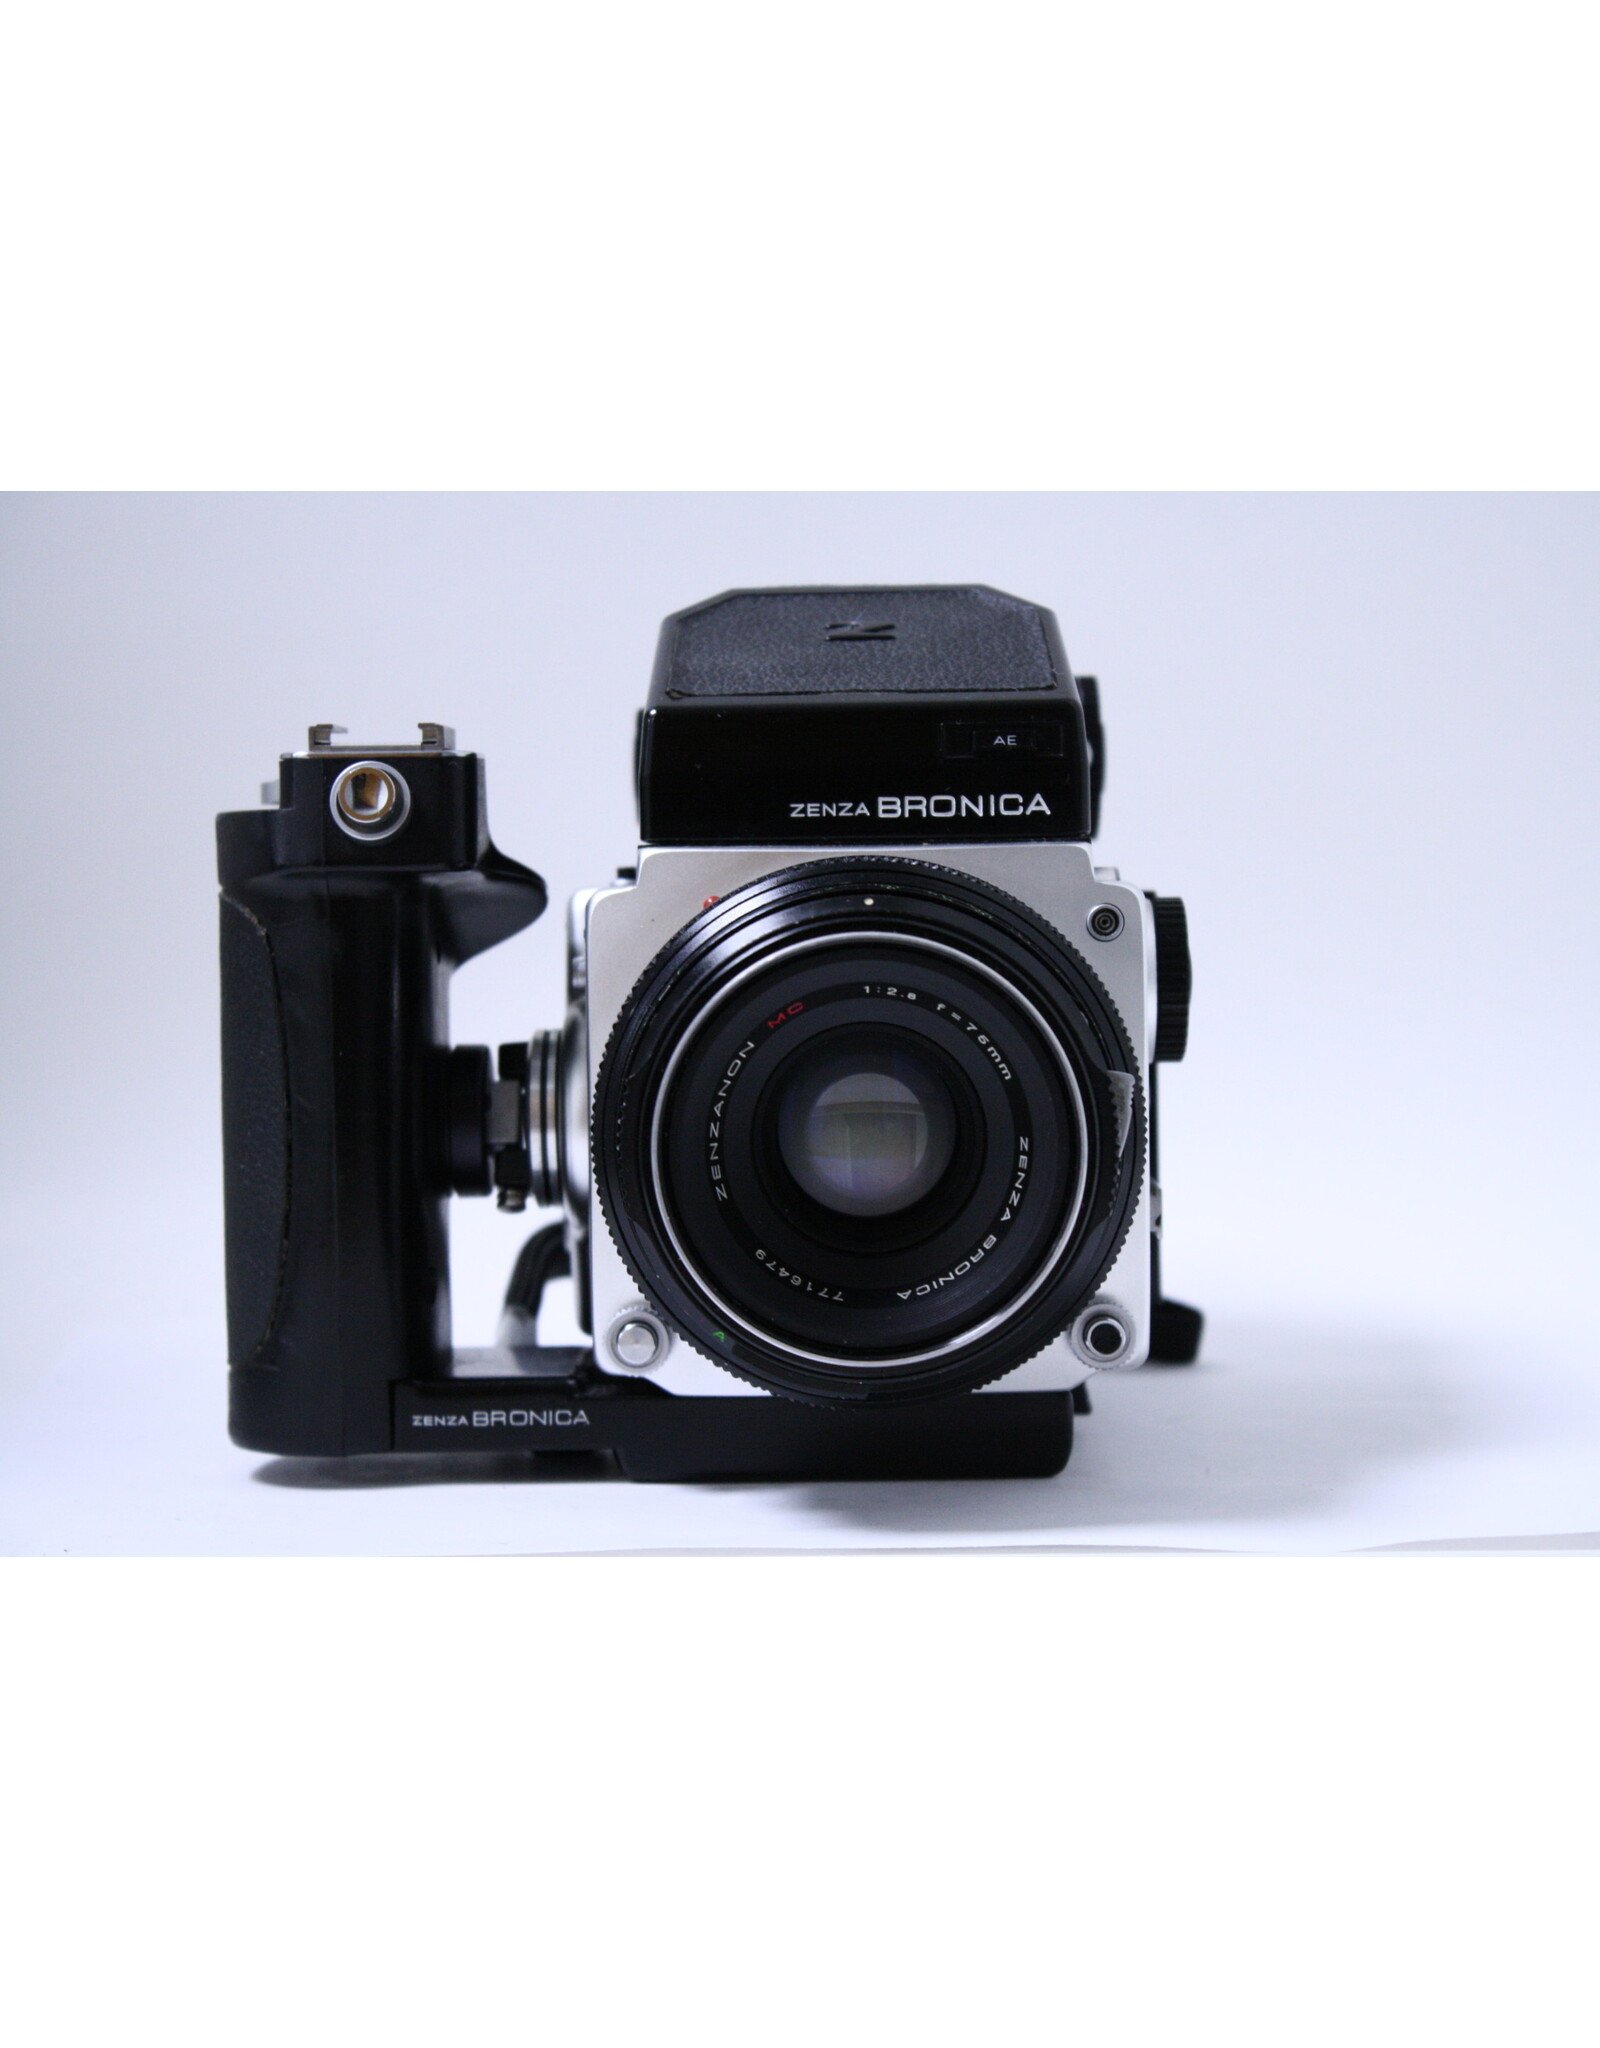 Bronica Zenza Bronica ETR with AE Finder, 120 Back, Grip, and 75mm f2.8  Lens (Pre-owned)